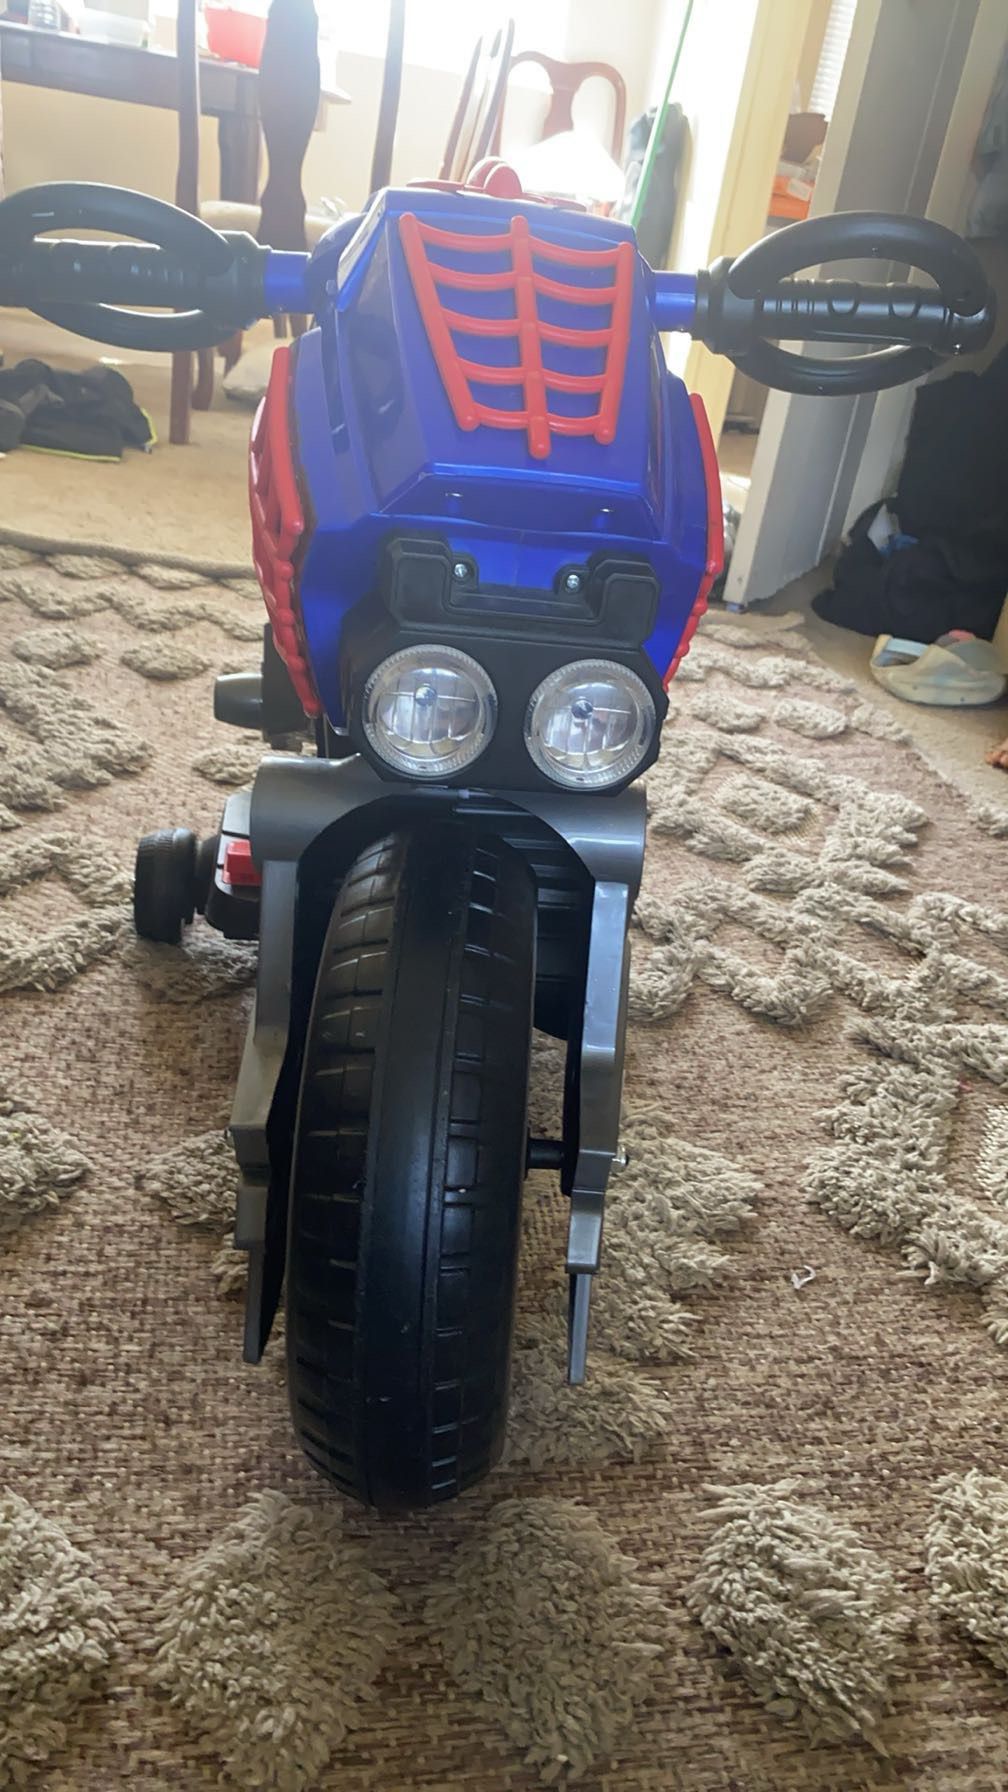 Spider-Man Motorcycle For Kids 